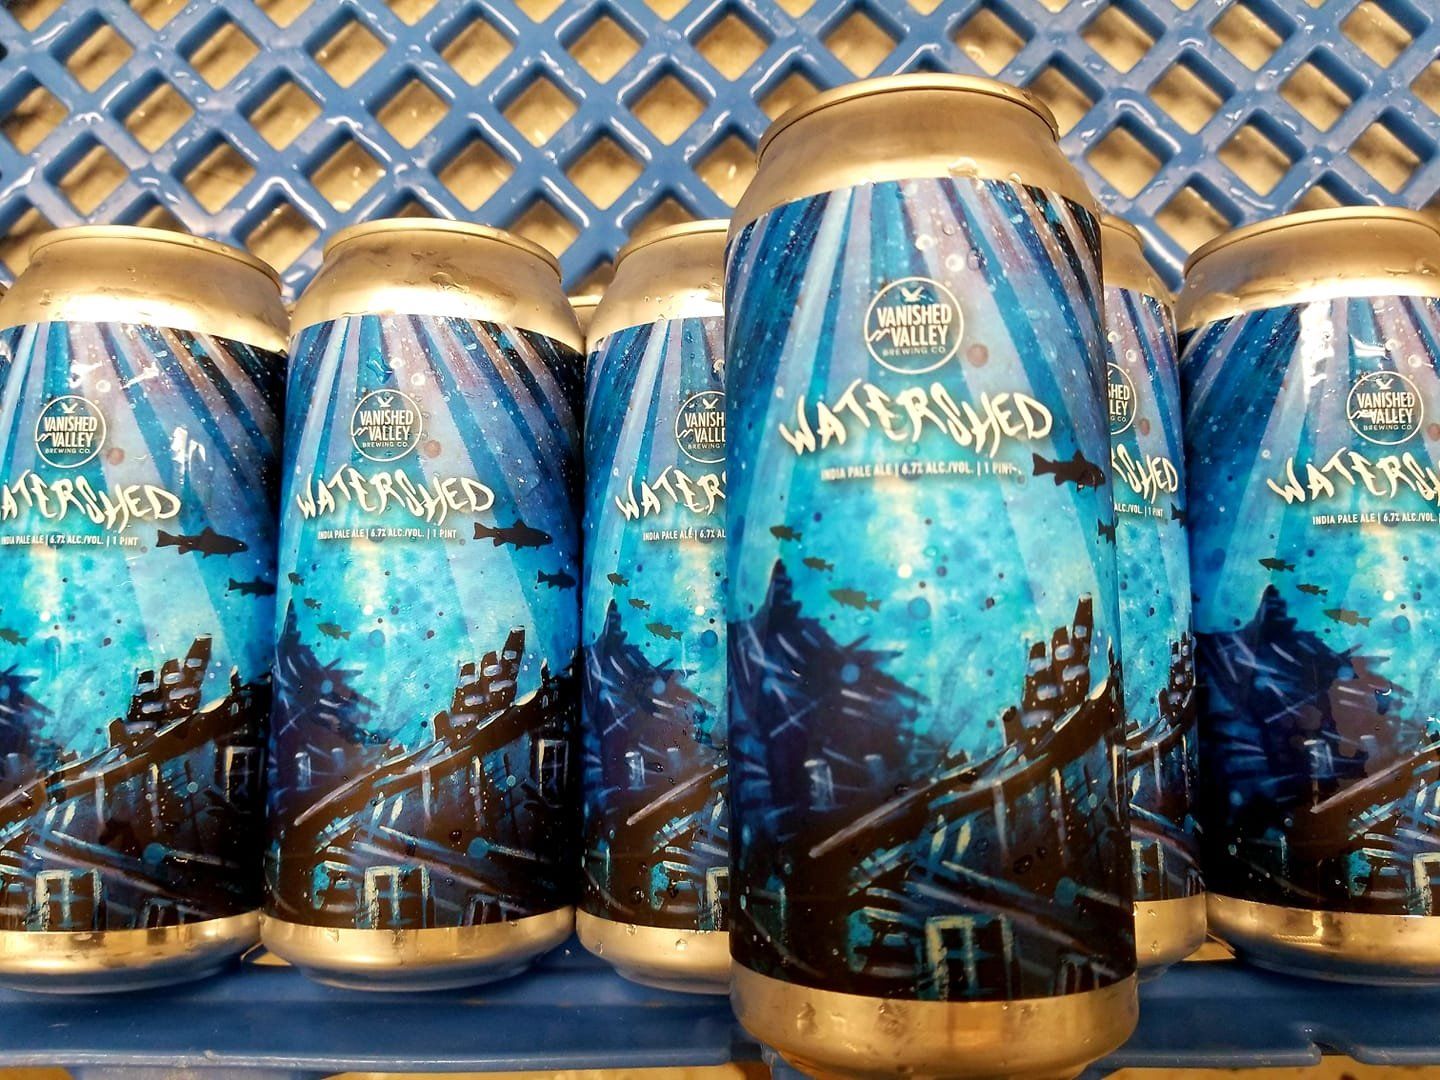 Vanished Valley's Watershed IPA